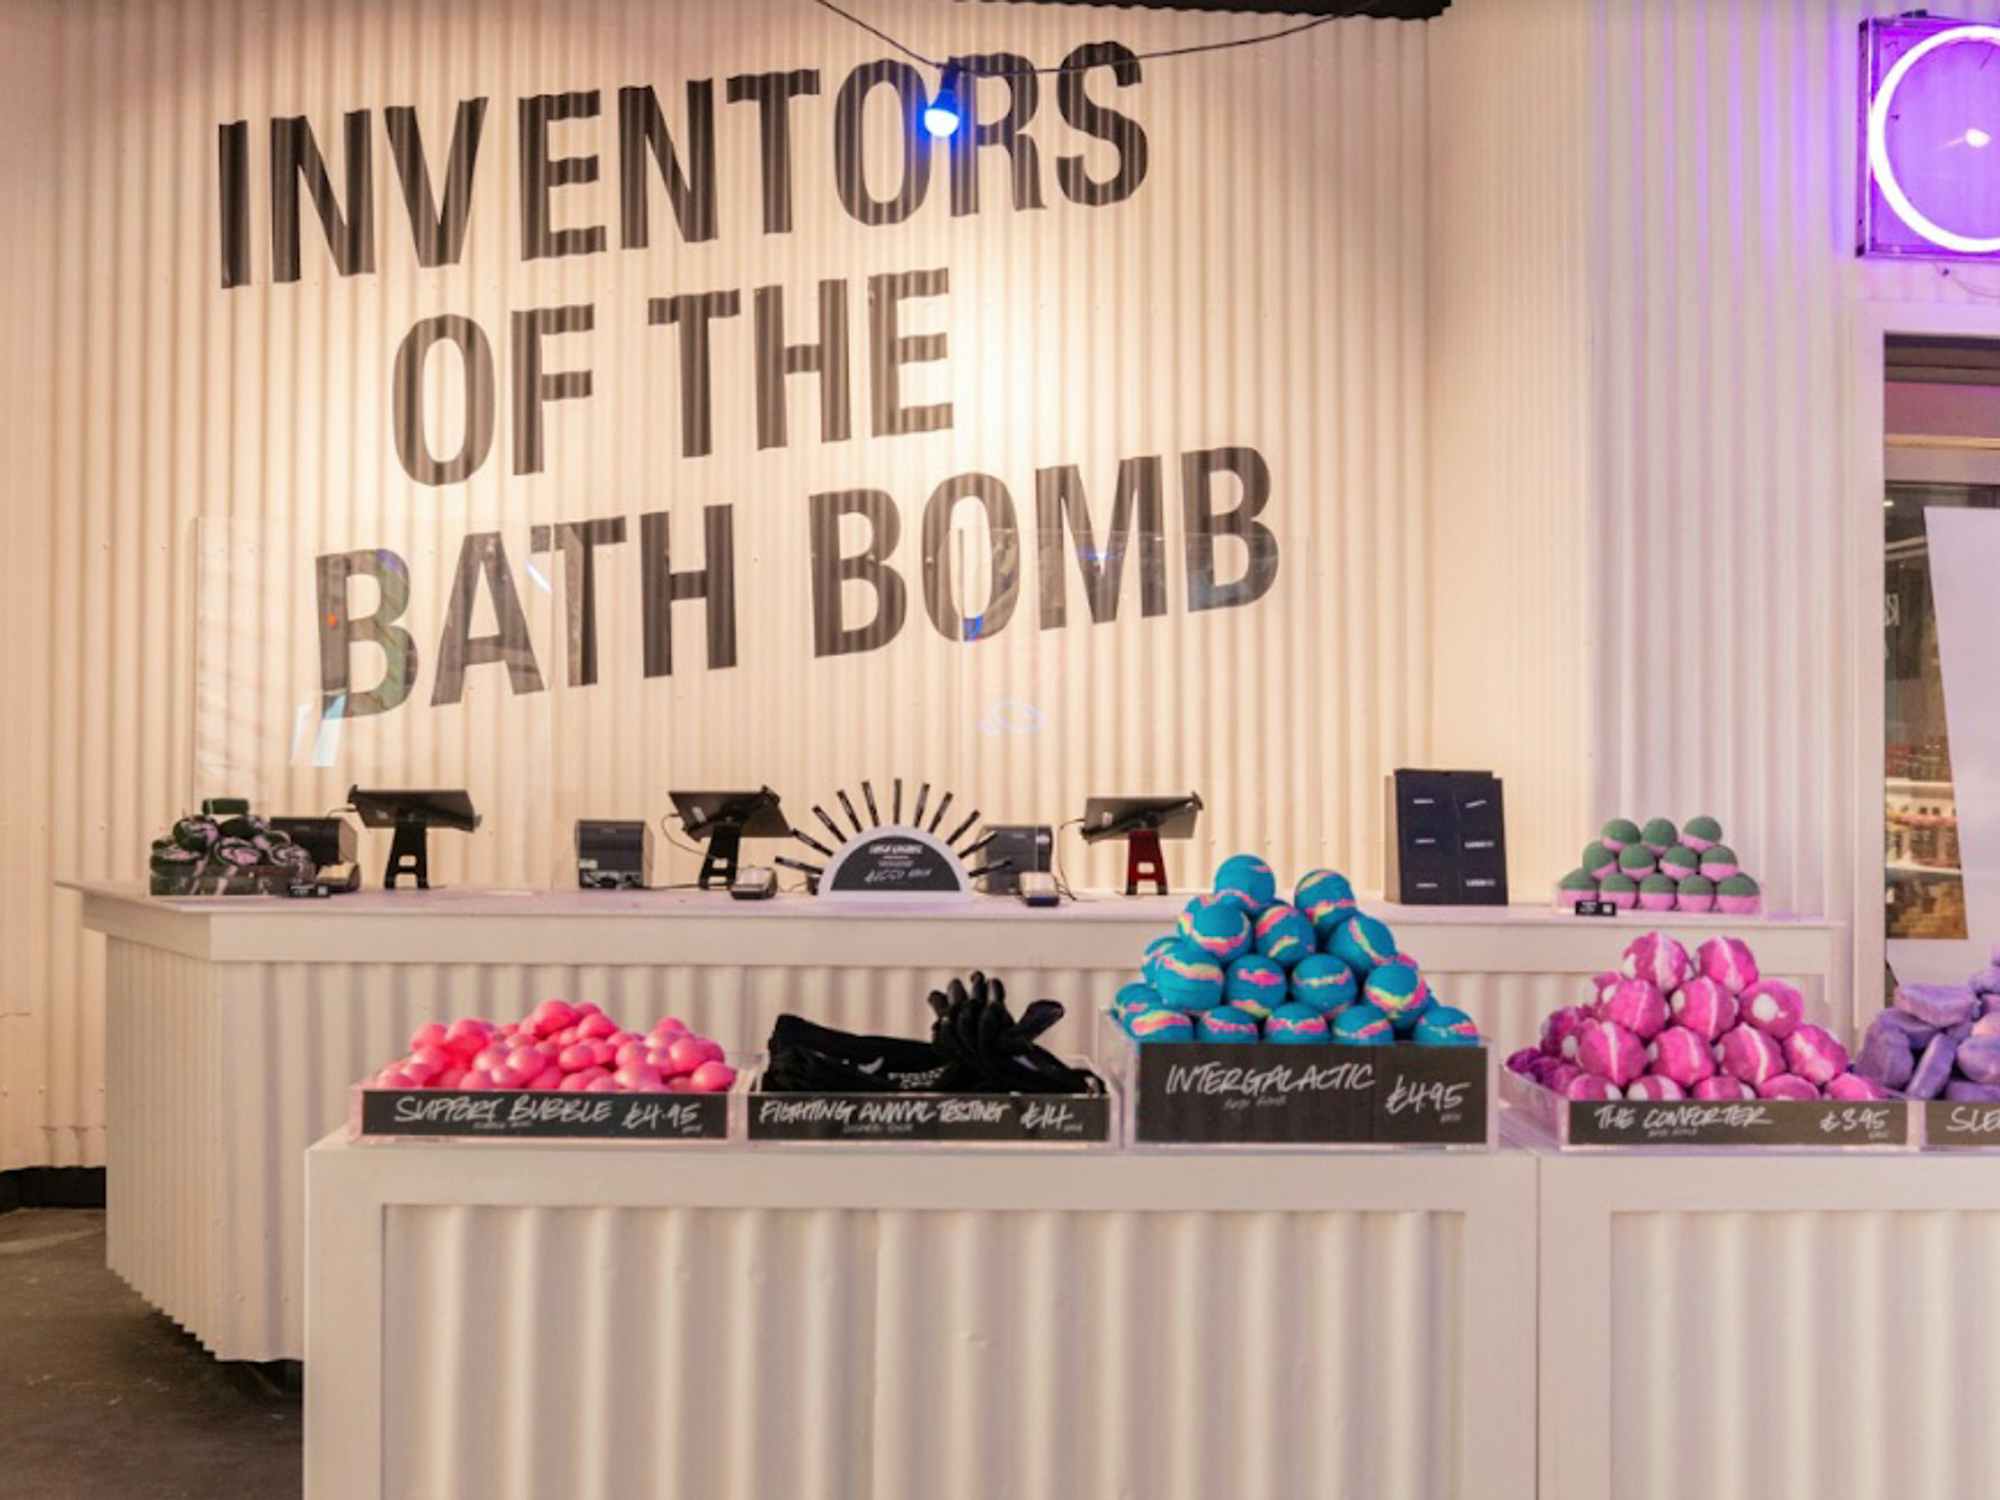 The counter in a Lush store with bath bombs on display